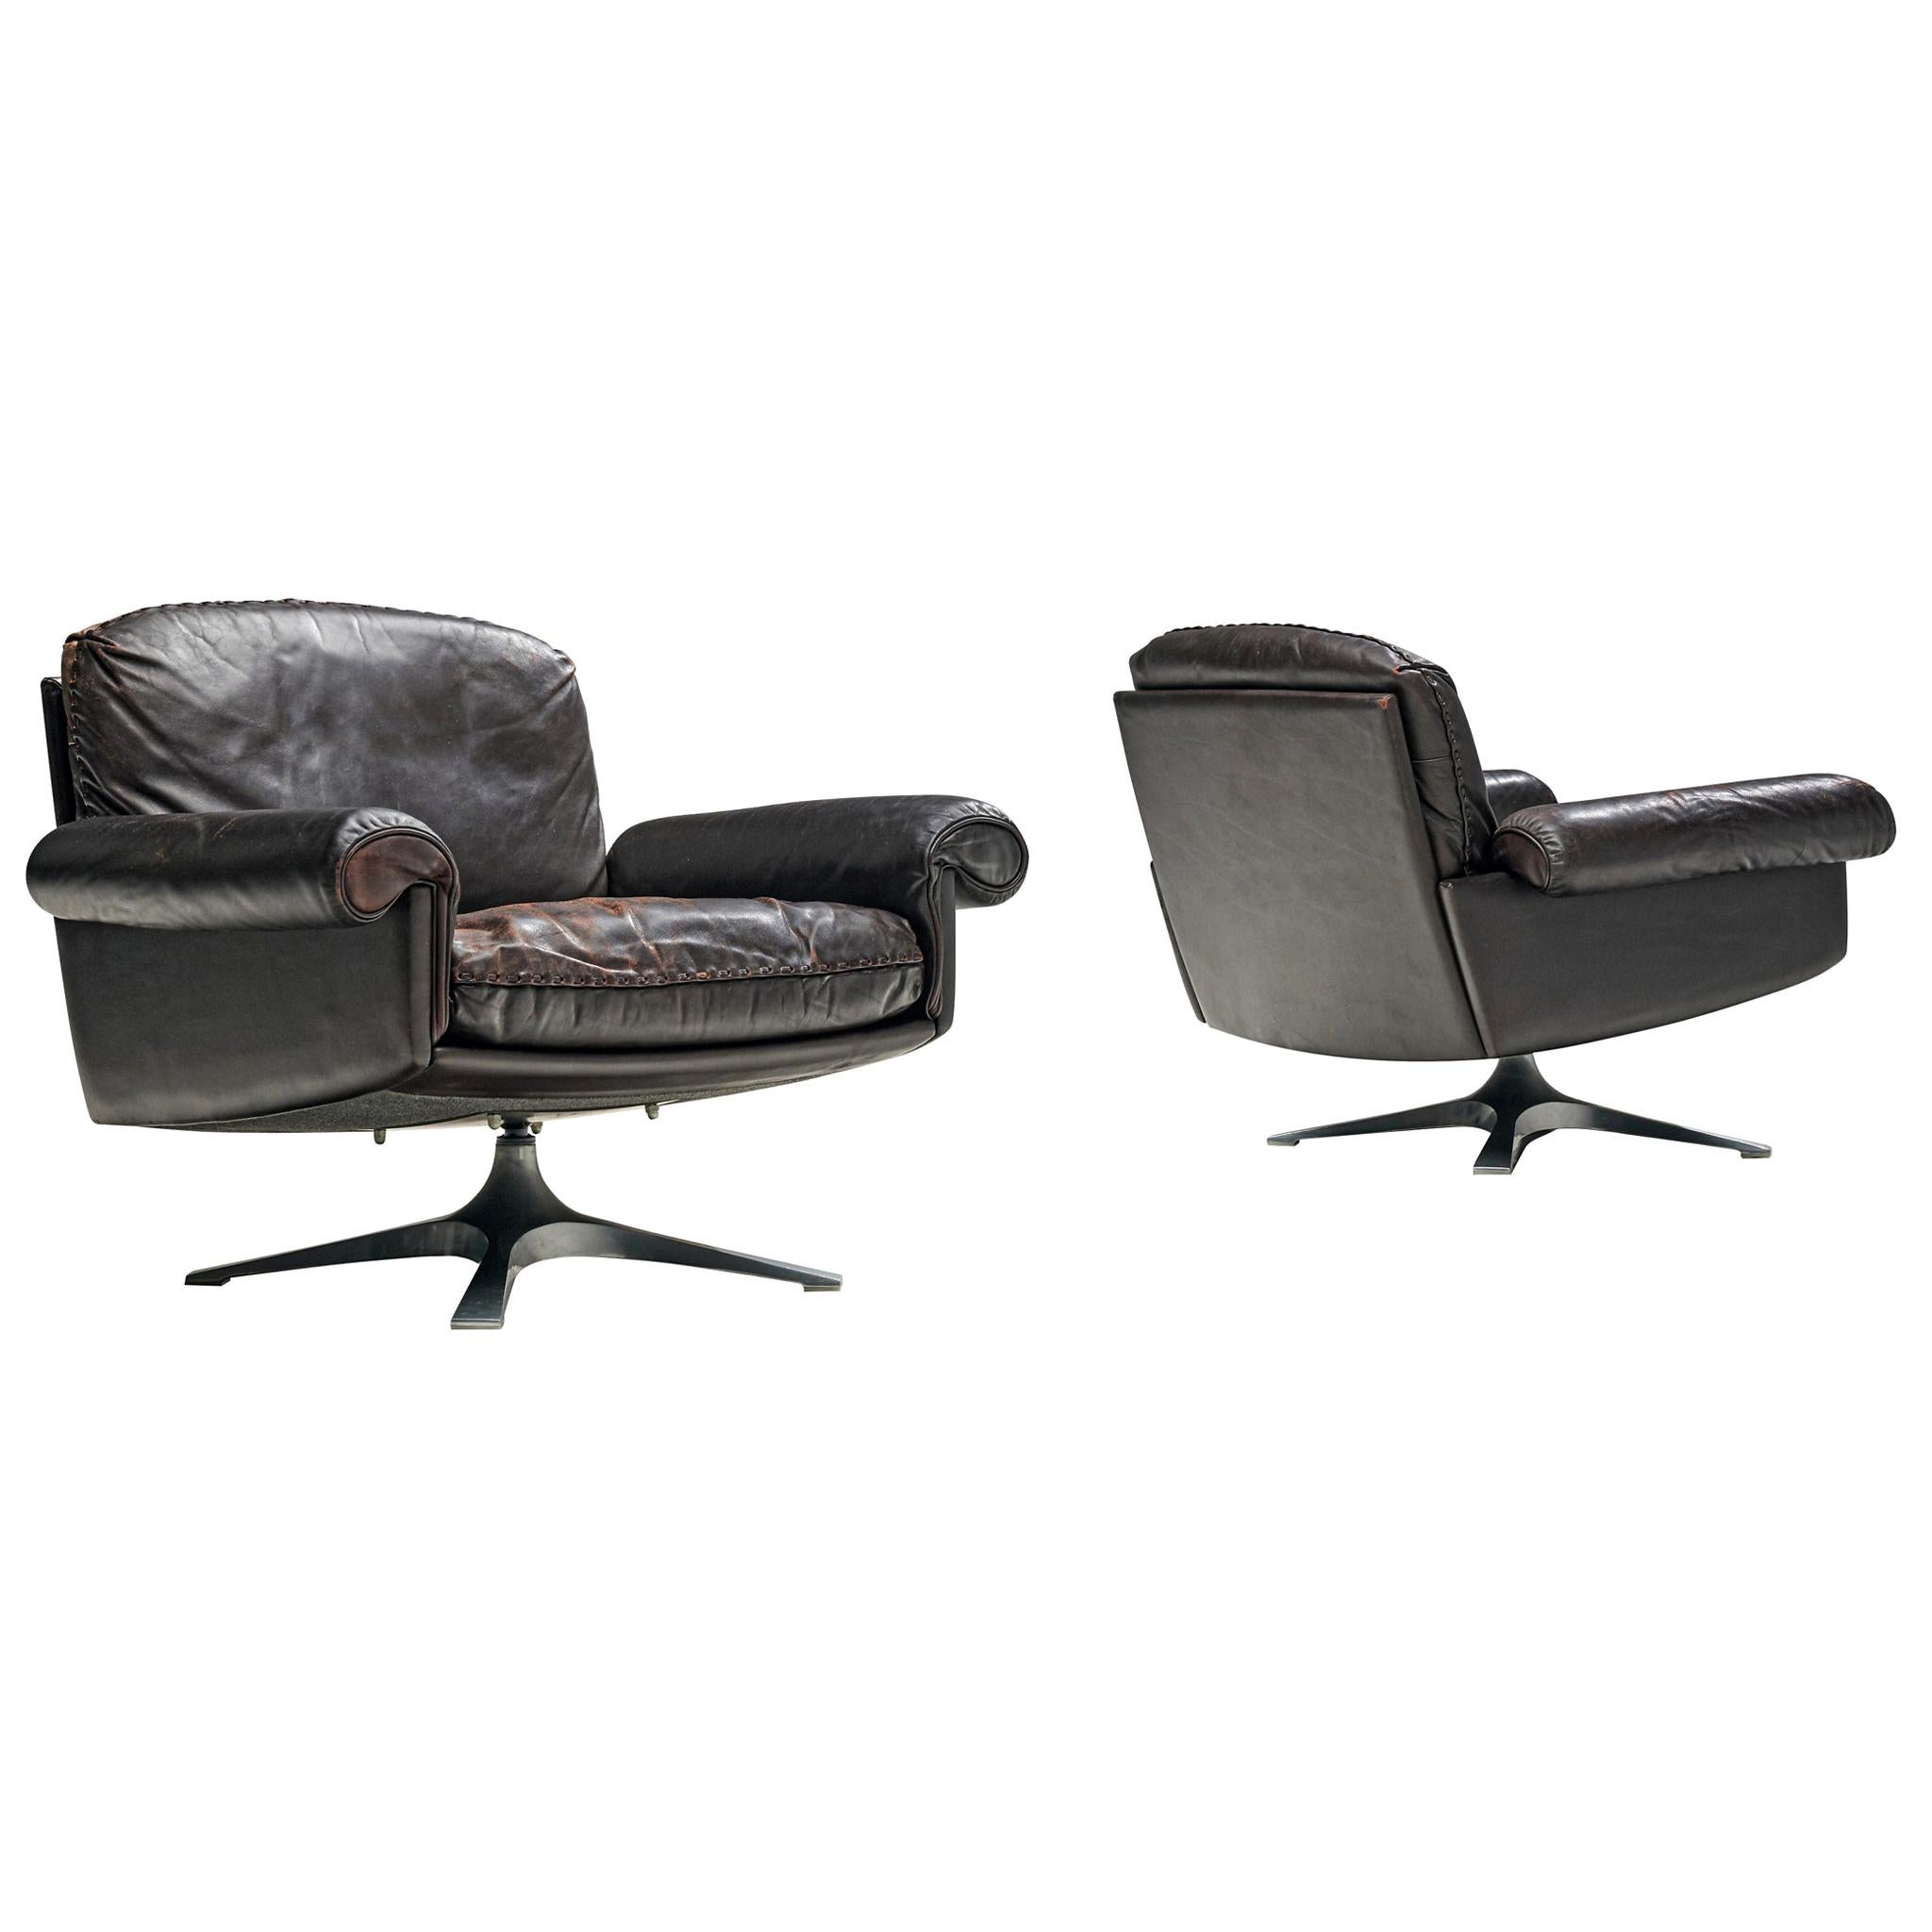 Pair of 'DS31' Swivel Chairs in Dark Brown Leather by De Sede